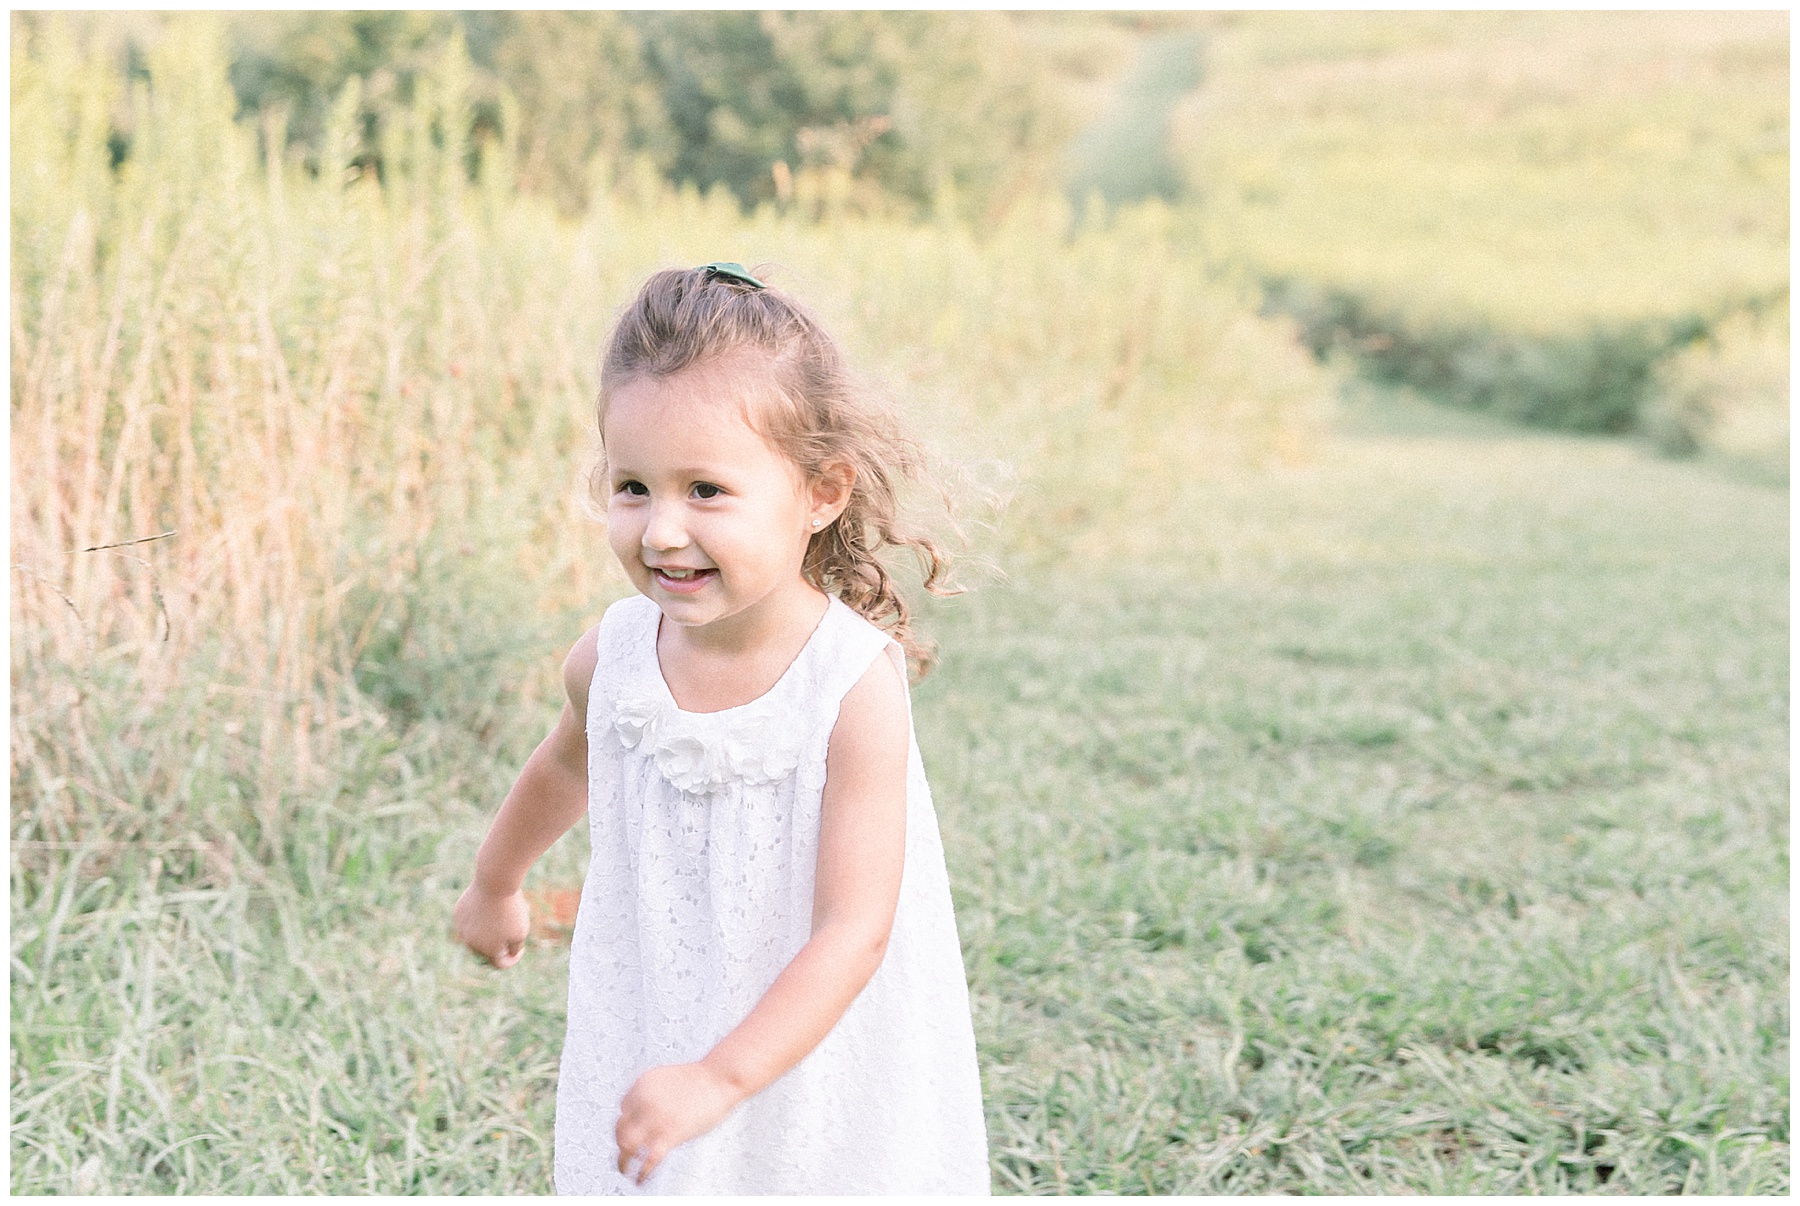 Baby girl running through field during sunset. Image taken by Katie Petrick Photography, Charlotte NC family photography